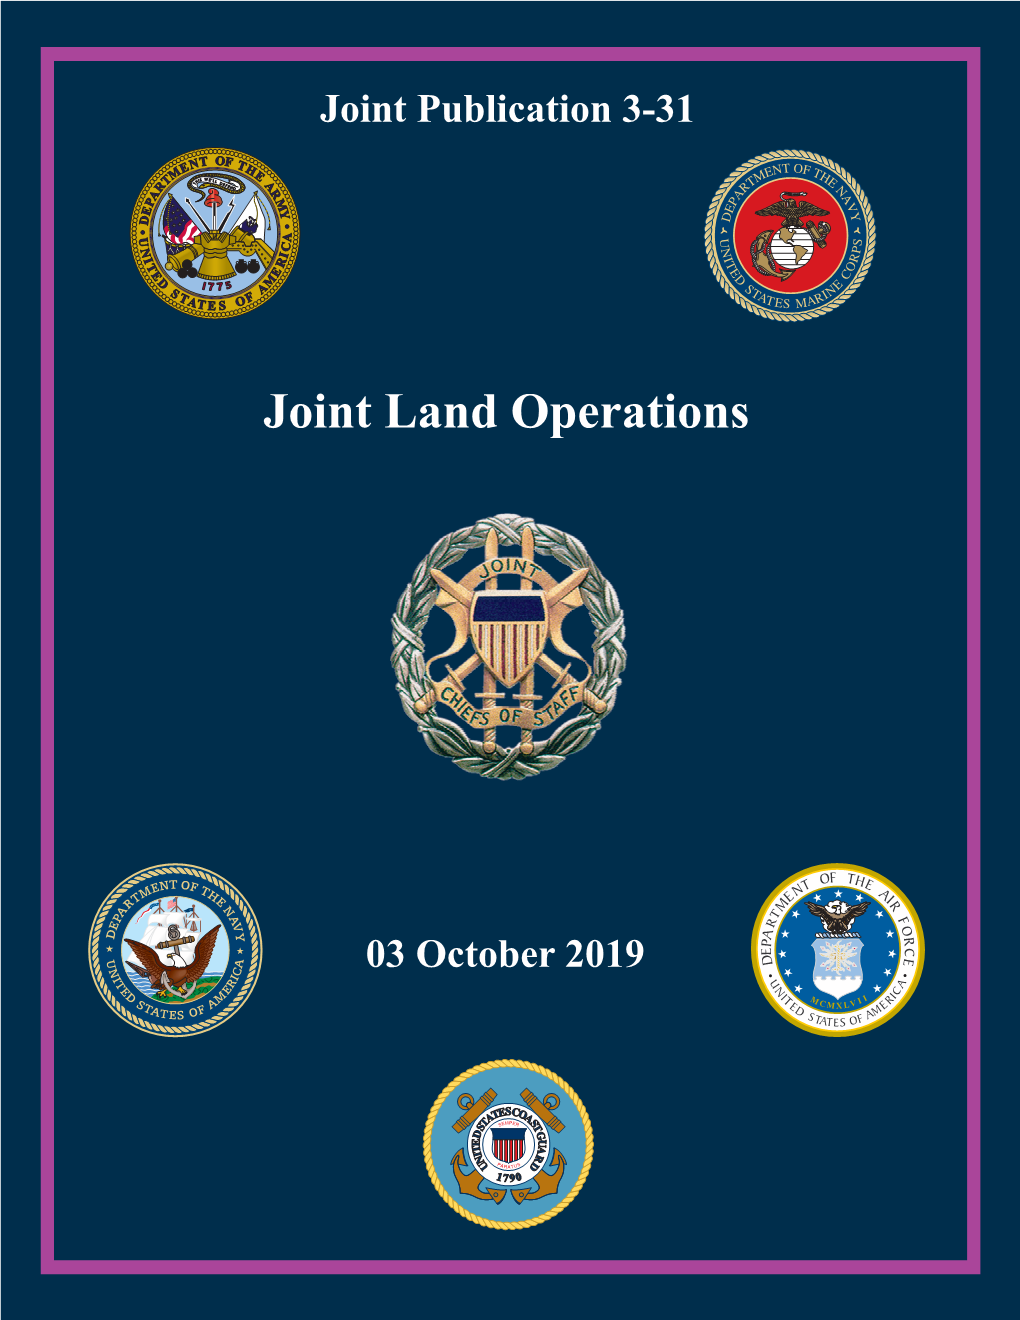 JP 3-31, Joint Land Operations, 03 October 2019